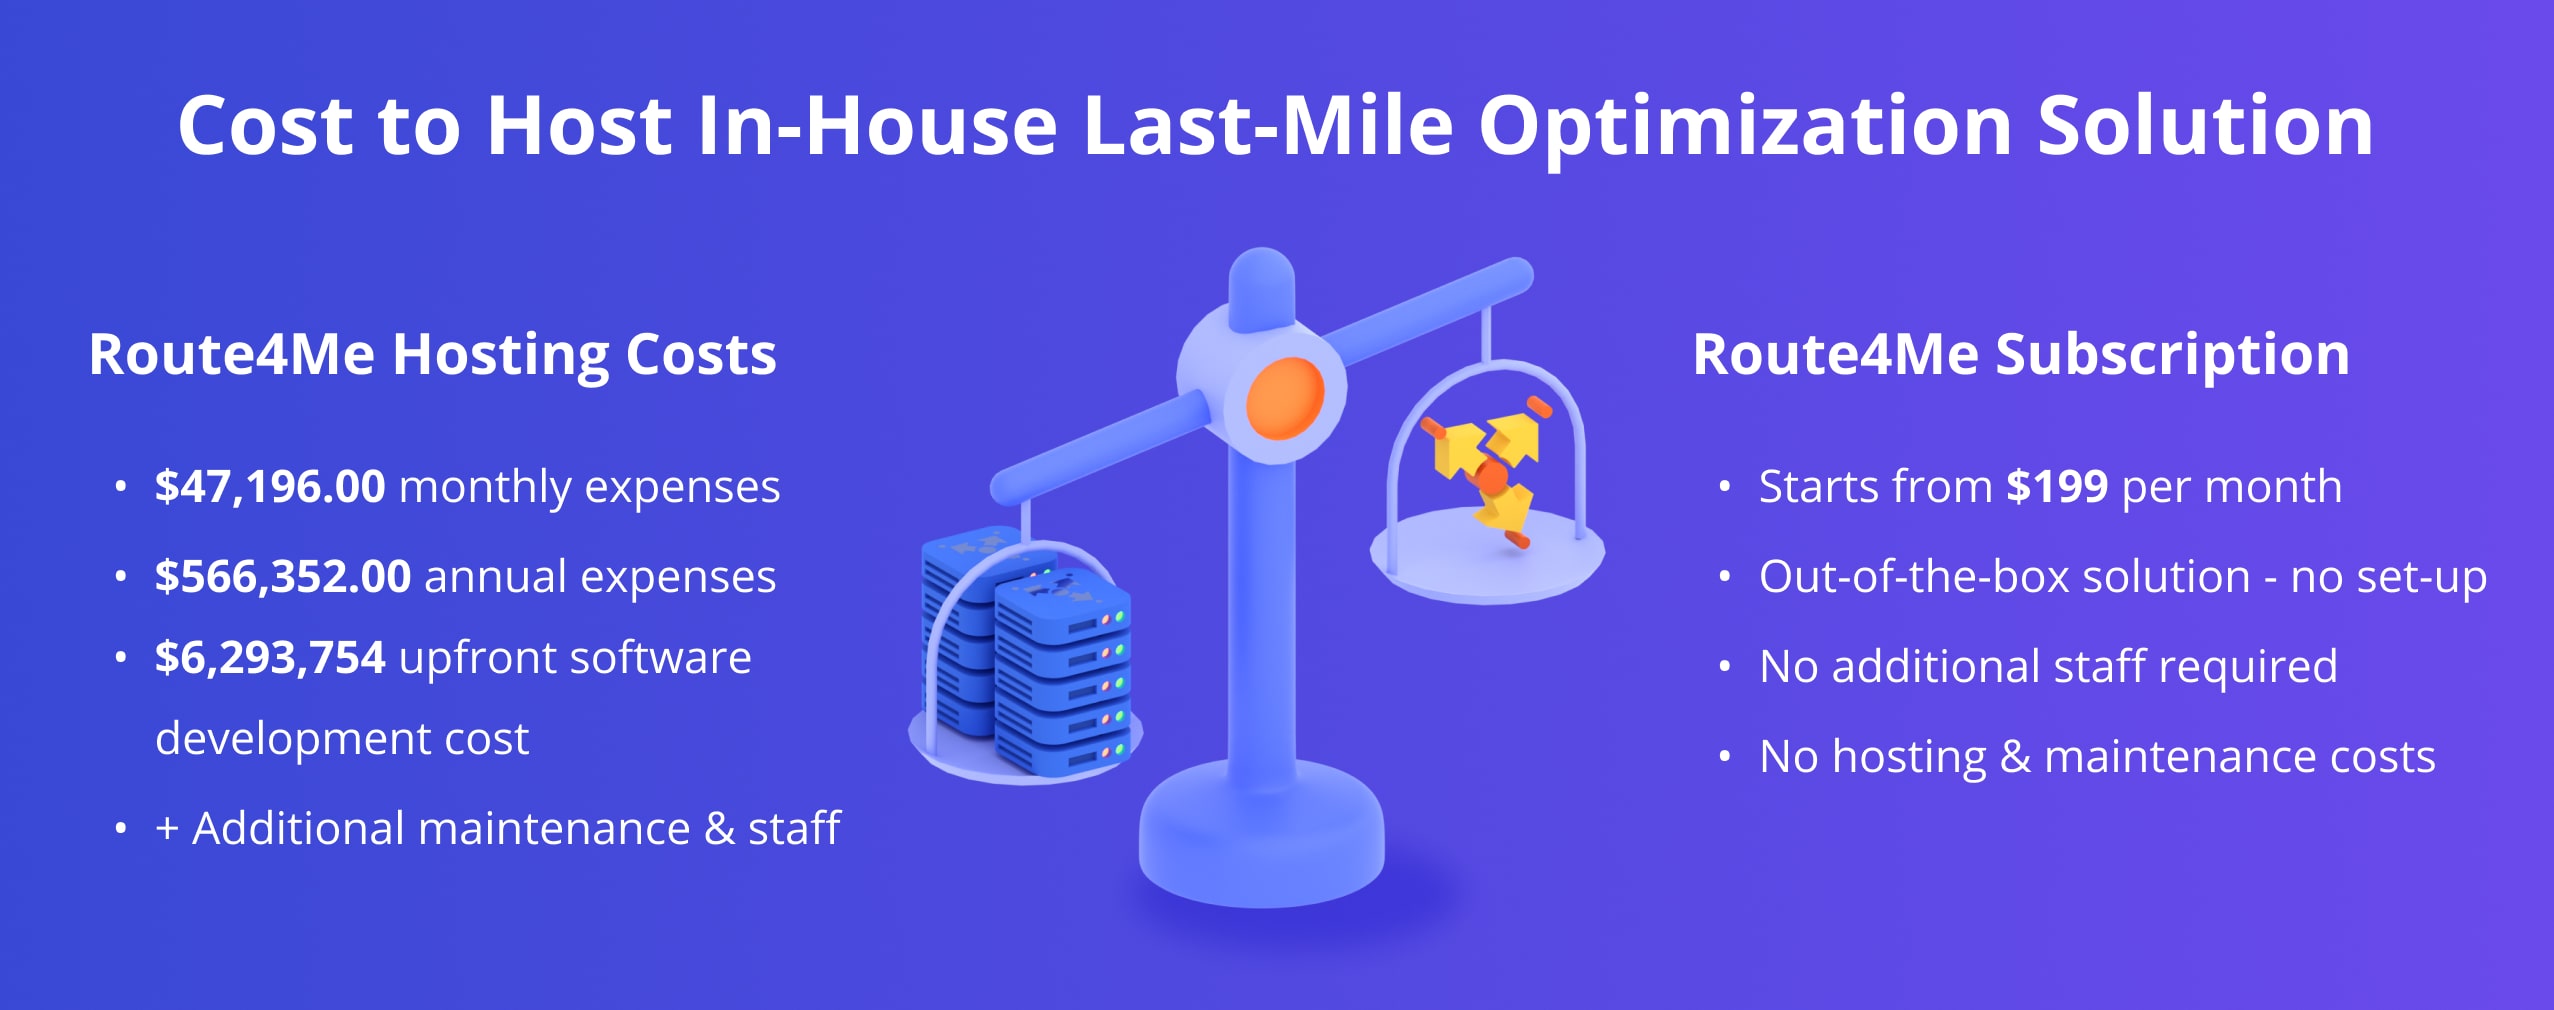 The costs to develop, host, and run an in-house last-mile route optimization software solution like Route4Me.